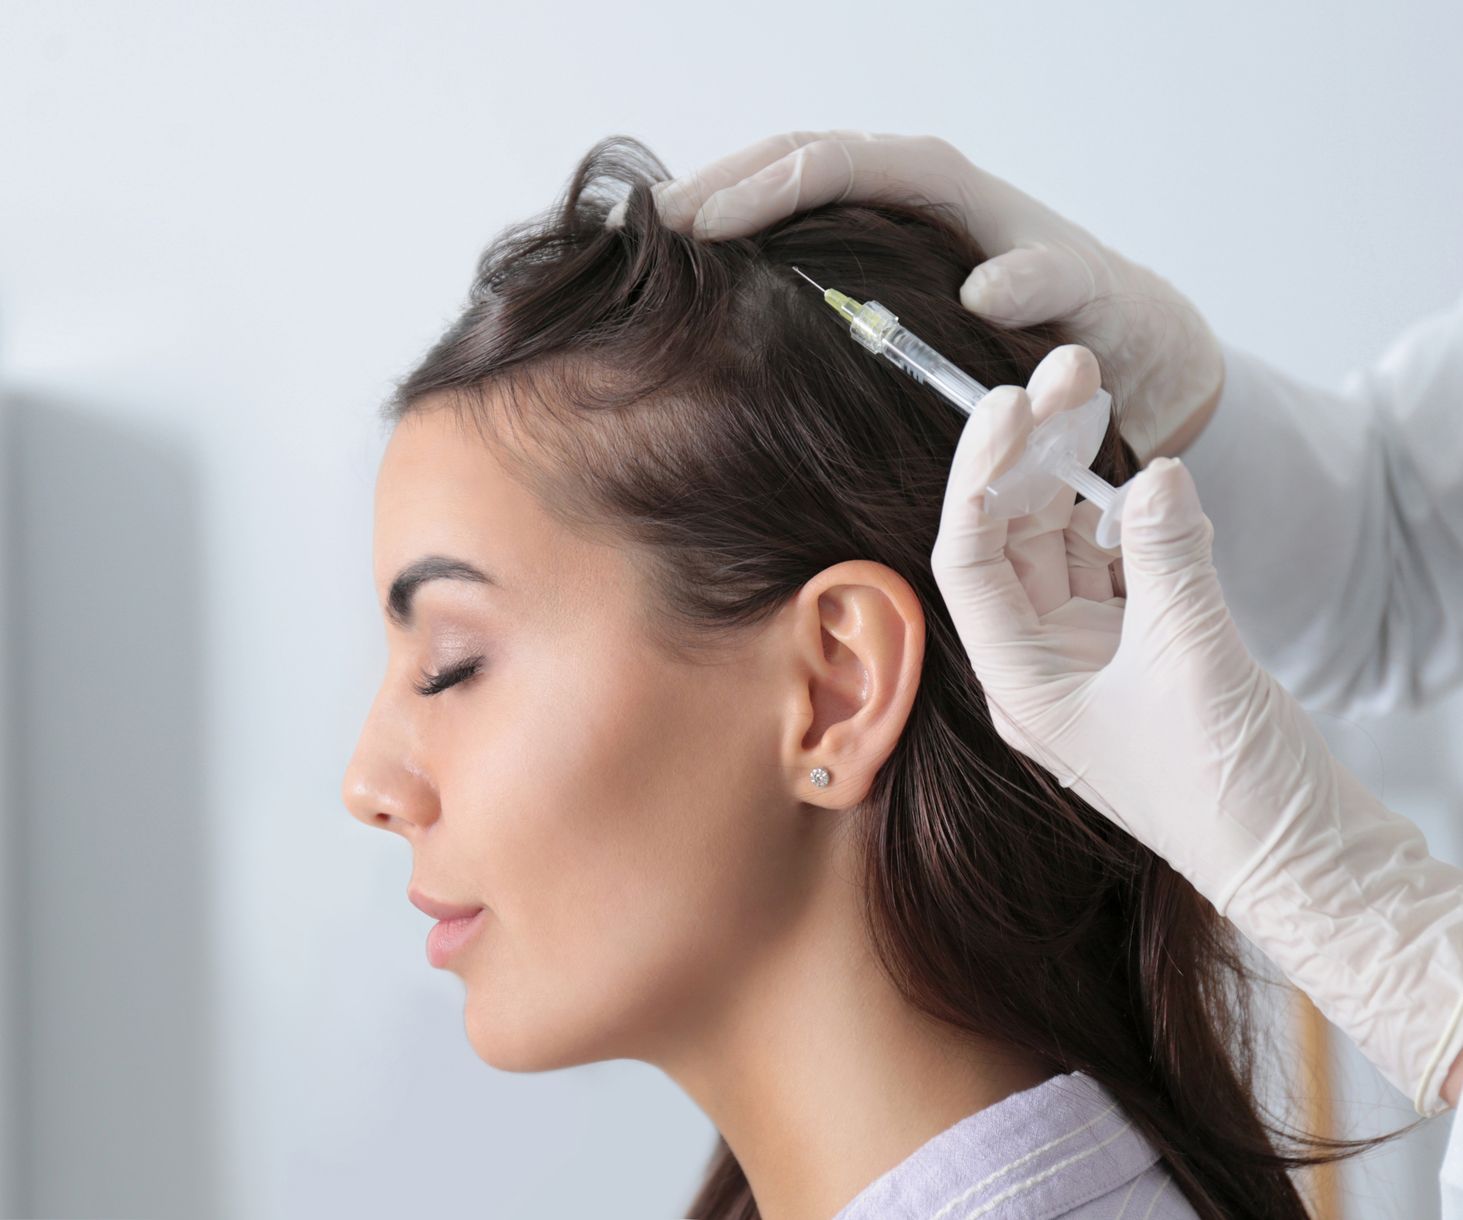 A woman is getting an injection for hair restoration.